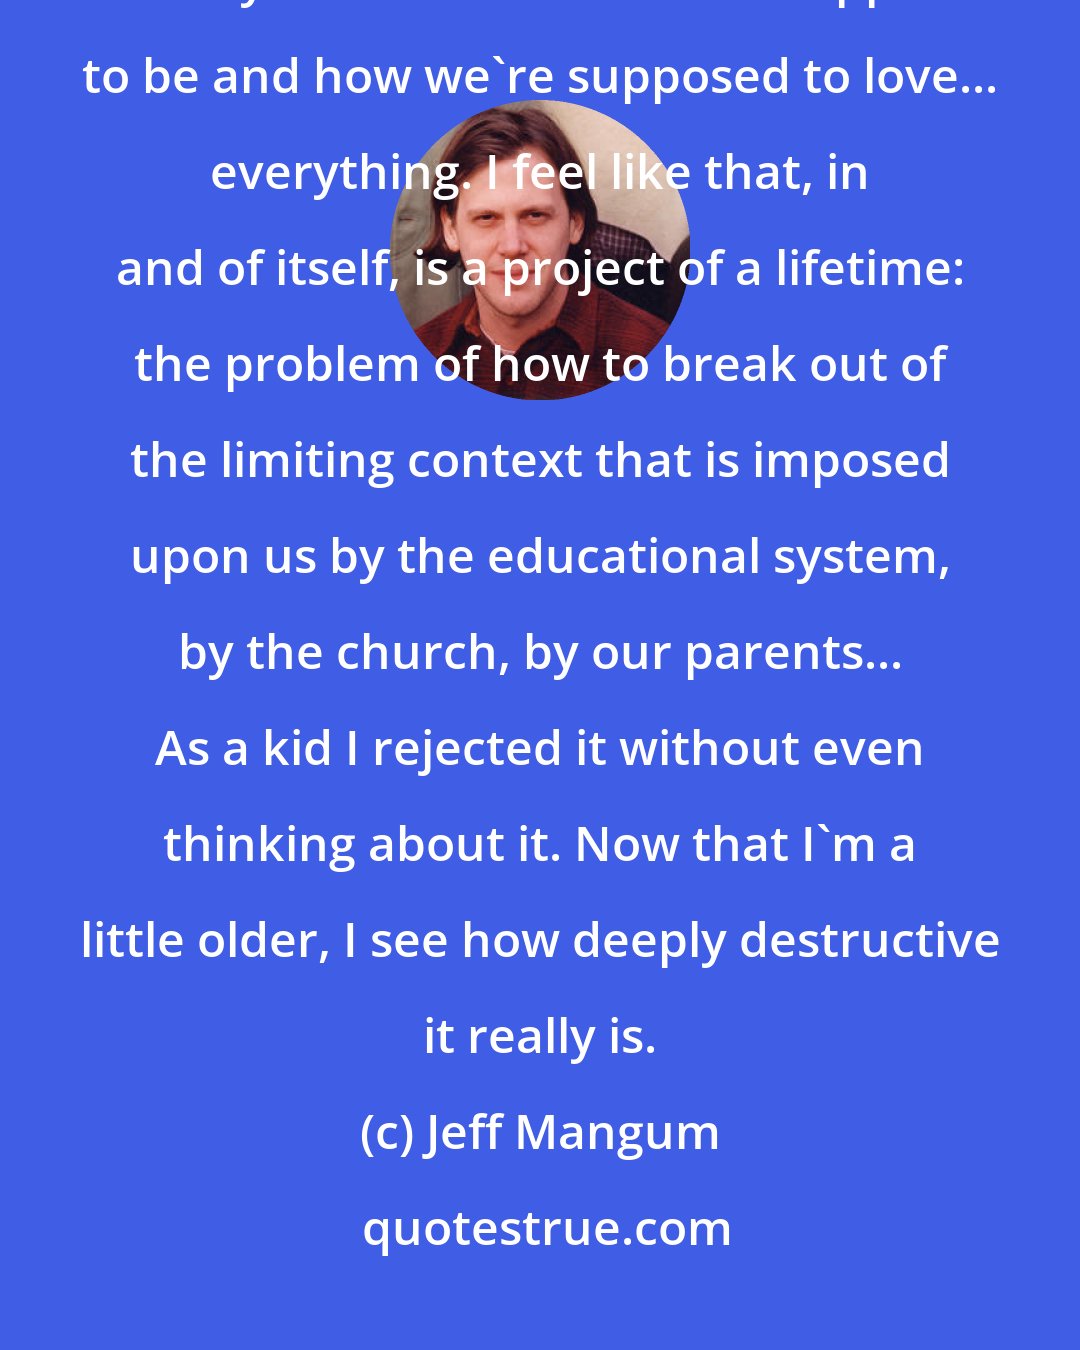 Jeff Mangum: I feel like we're so limited by the context at which we look at life. The way we look at who we're supposed to be and how we're supposed to love... everything. I feel like that, in and of itself, is a project of a lifetime: the problem of how to break out of the limiting context that is imposed upon us by the educational system, by the church, by our parents... As a kid I rejected it without even thinking about it. Now that I'm a little older, I see how deeply destructive it really is.